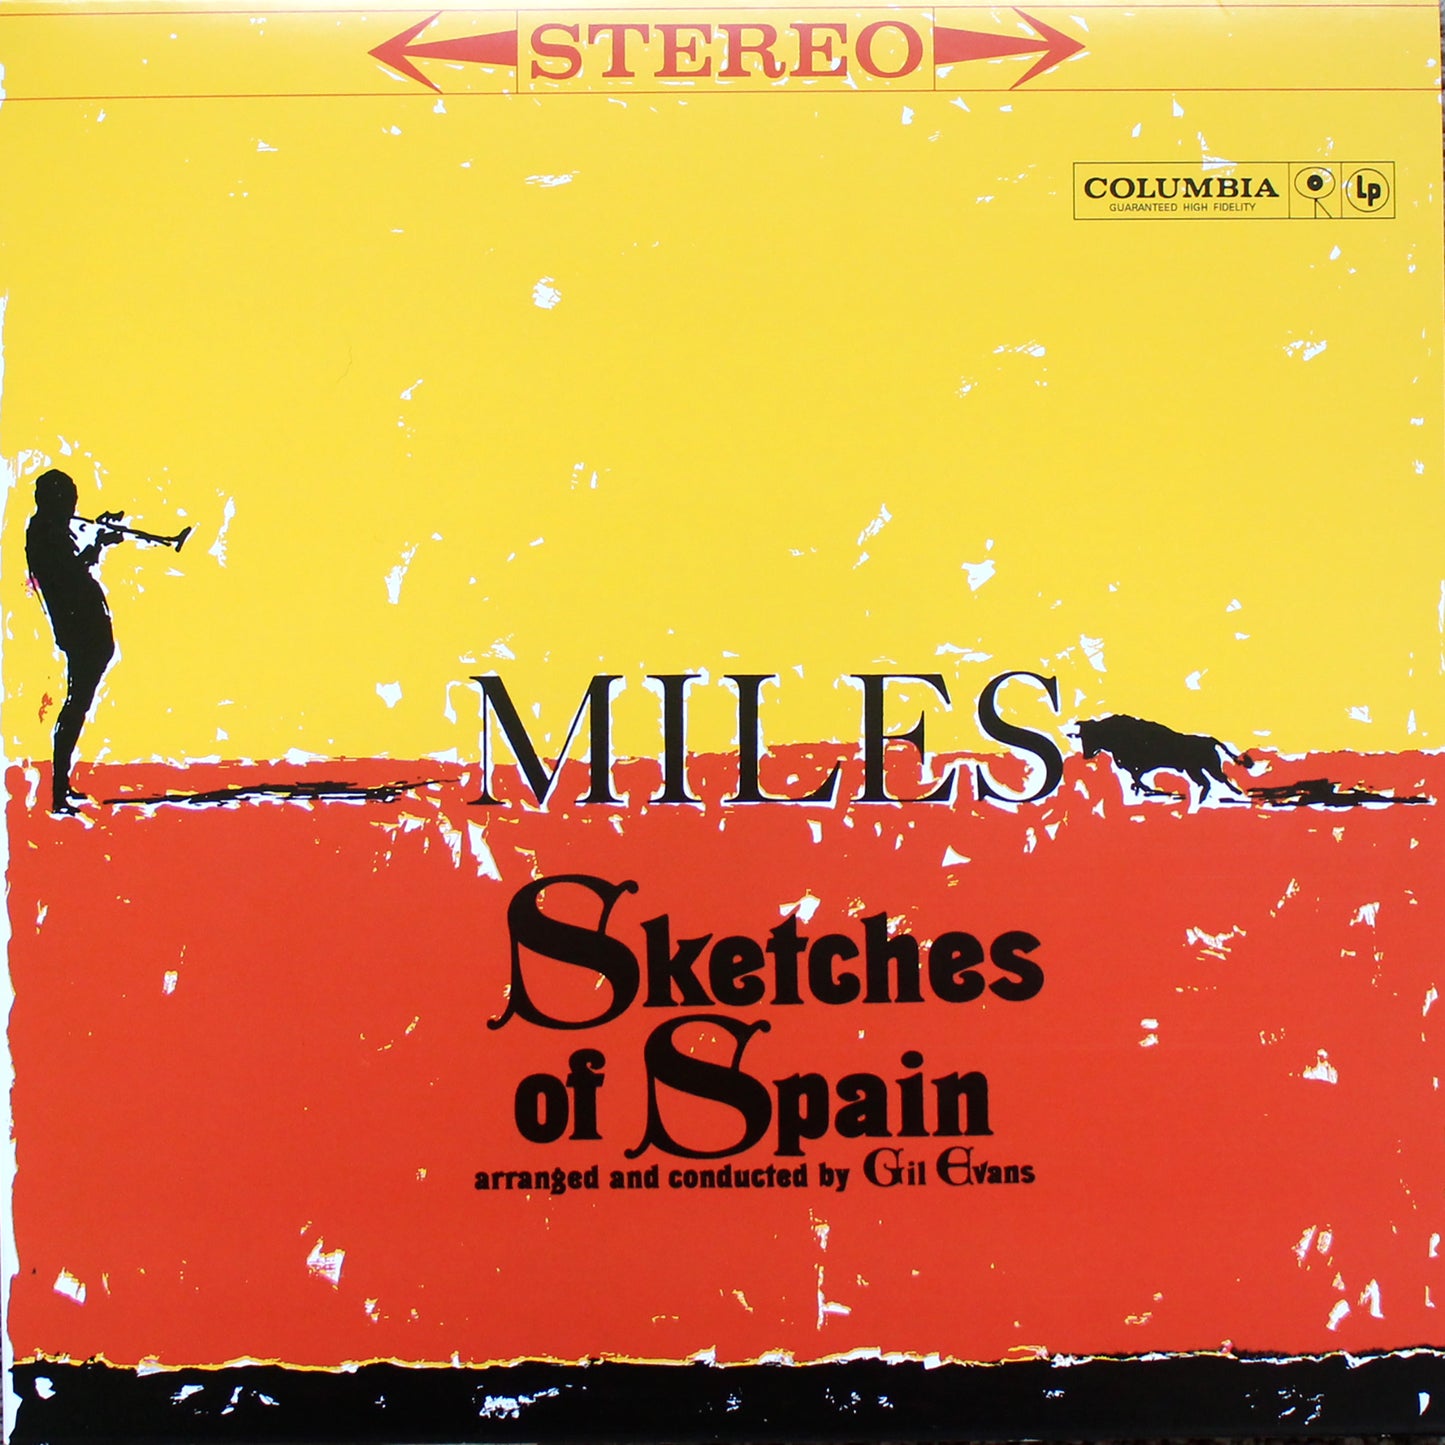 Miles Davis - Sketches From Spain